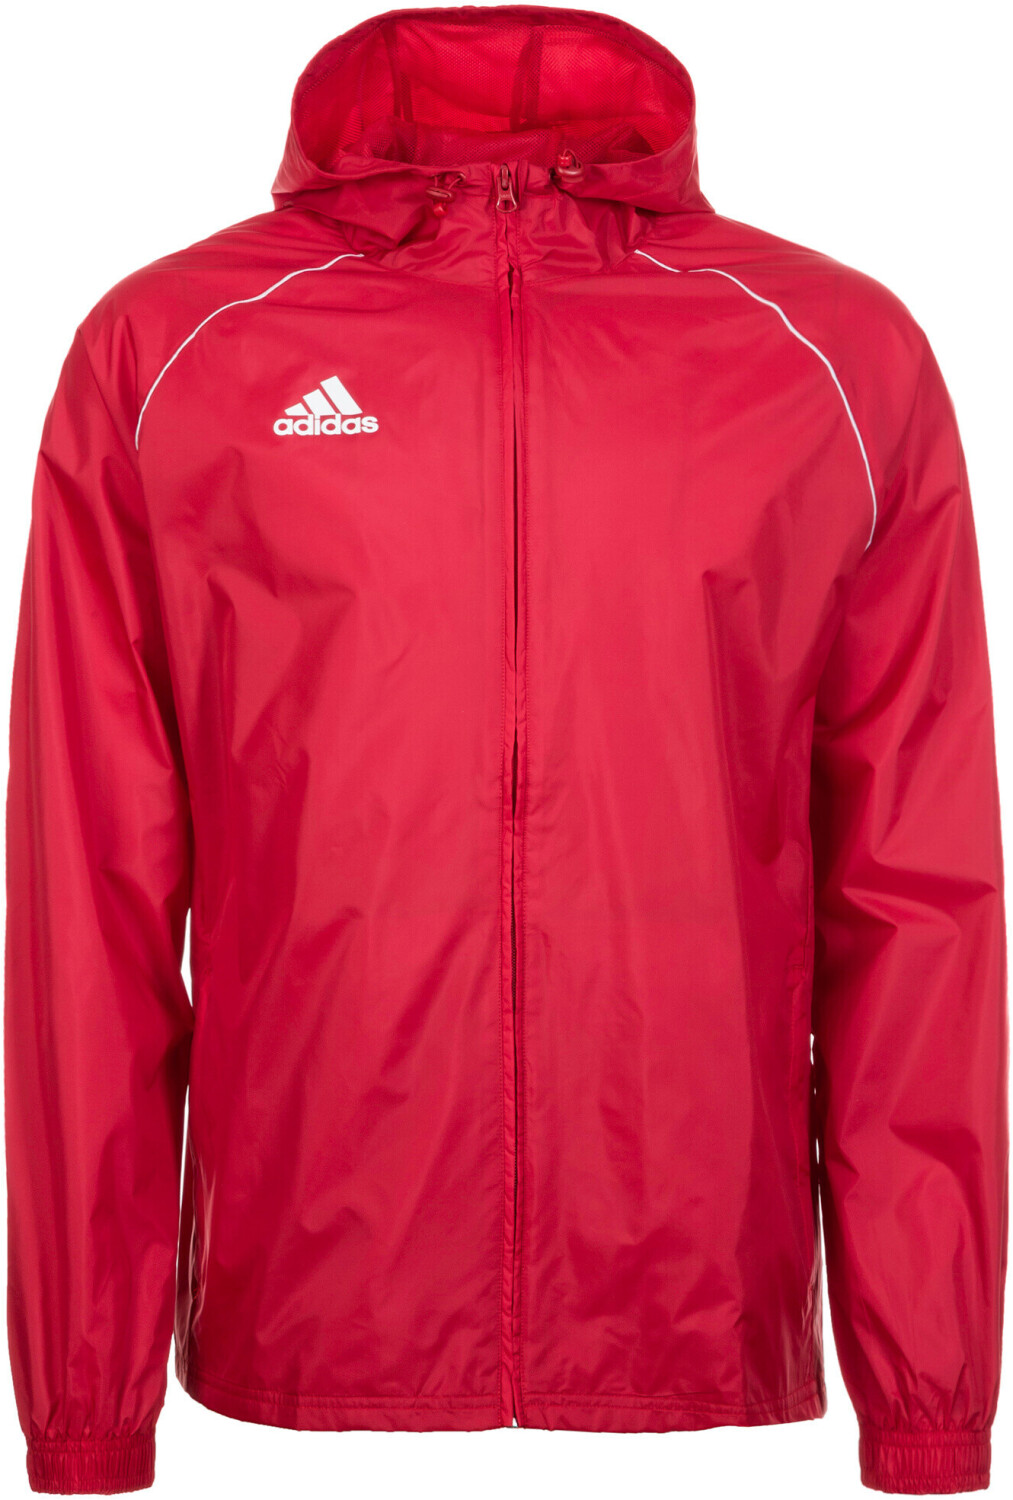 Buy Adidas Core18 Rain Jacket red (CV3695) from £20.99 (Today) – Best ...